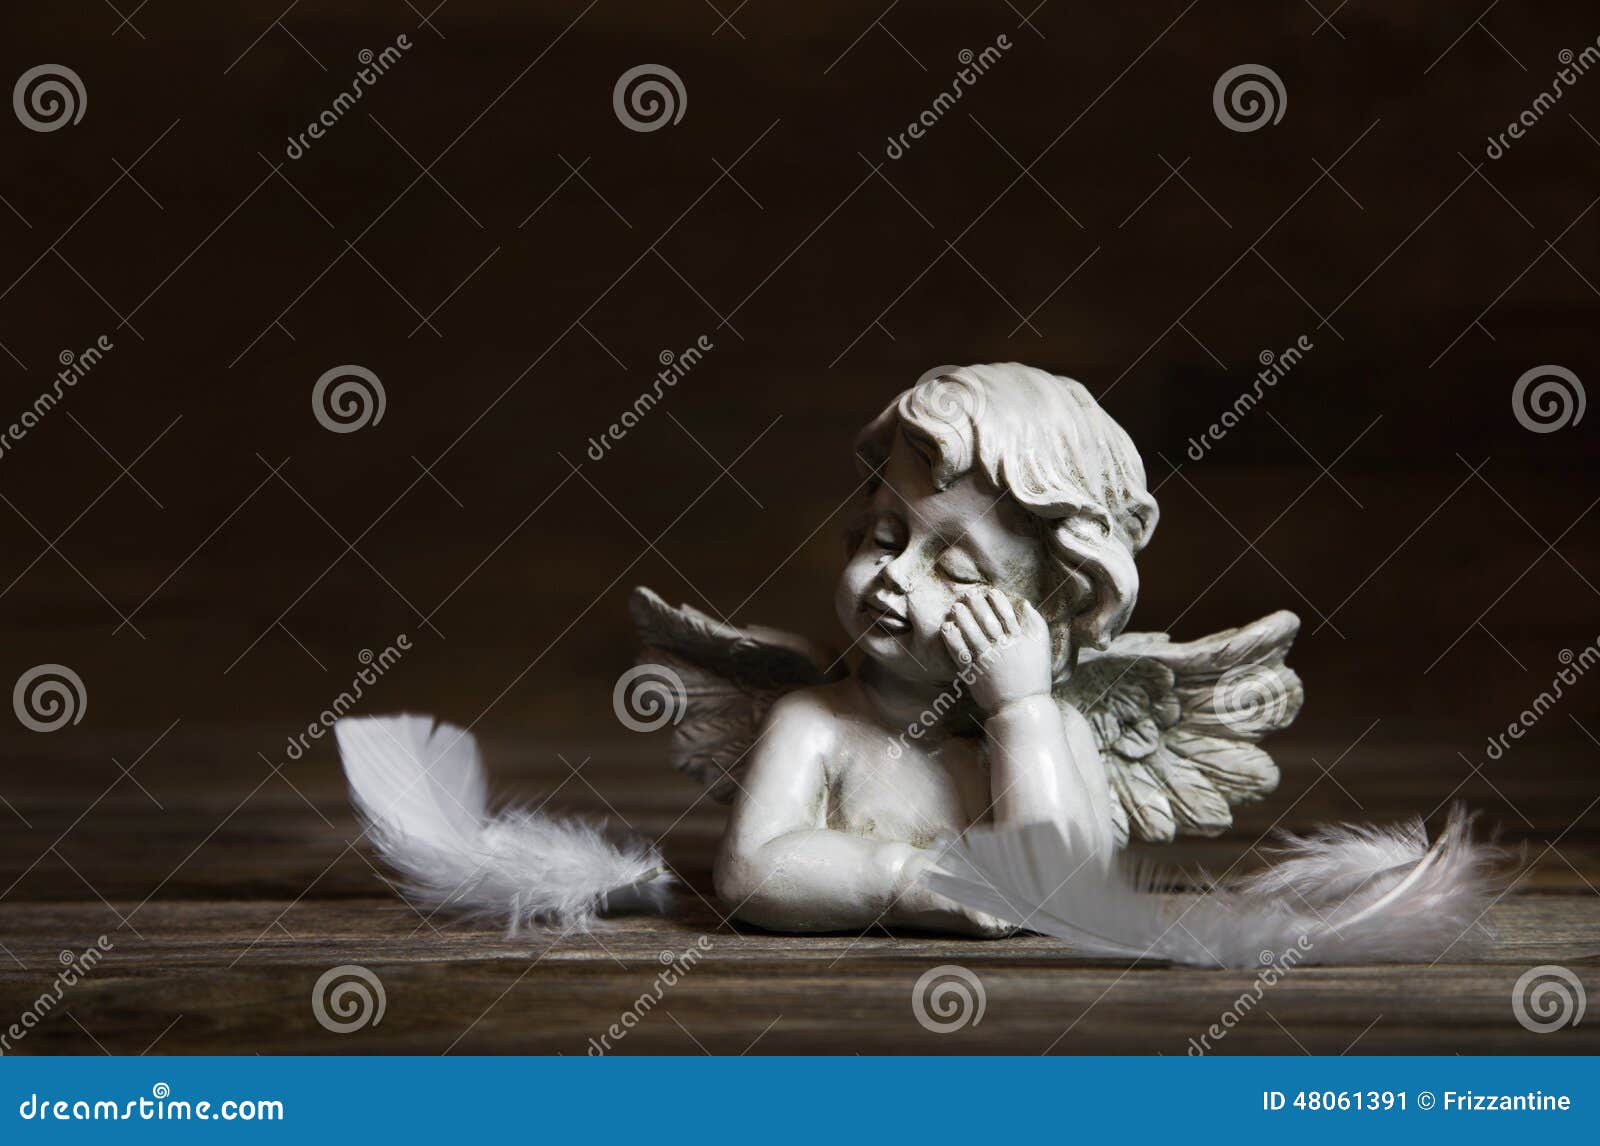 sad angel with white feathers on a dark background for bereavement.